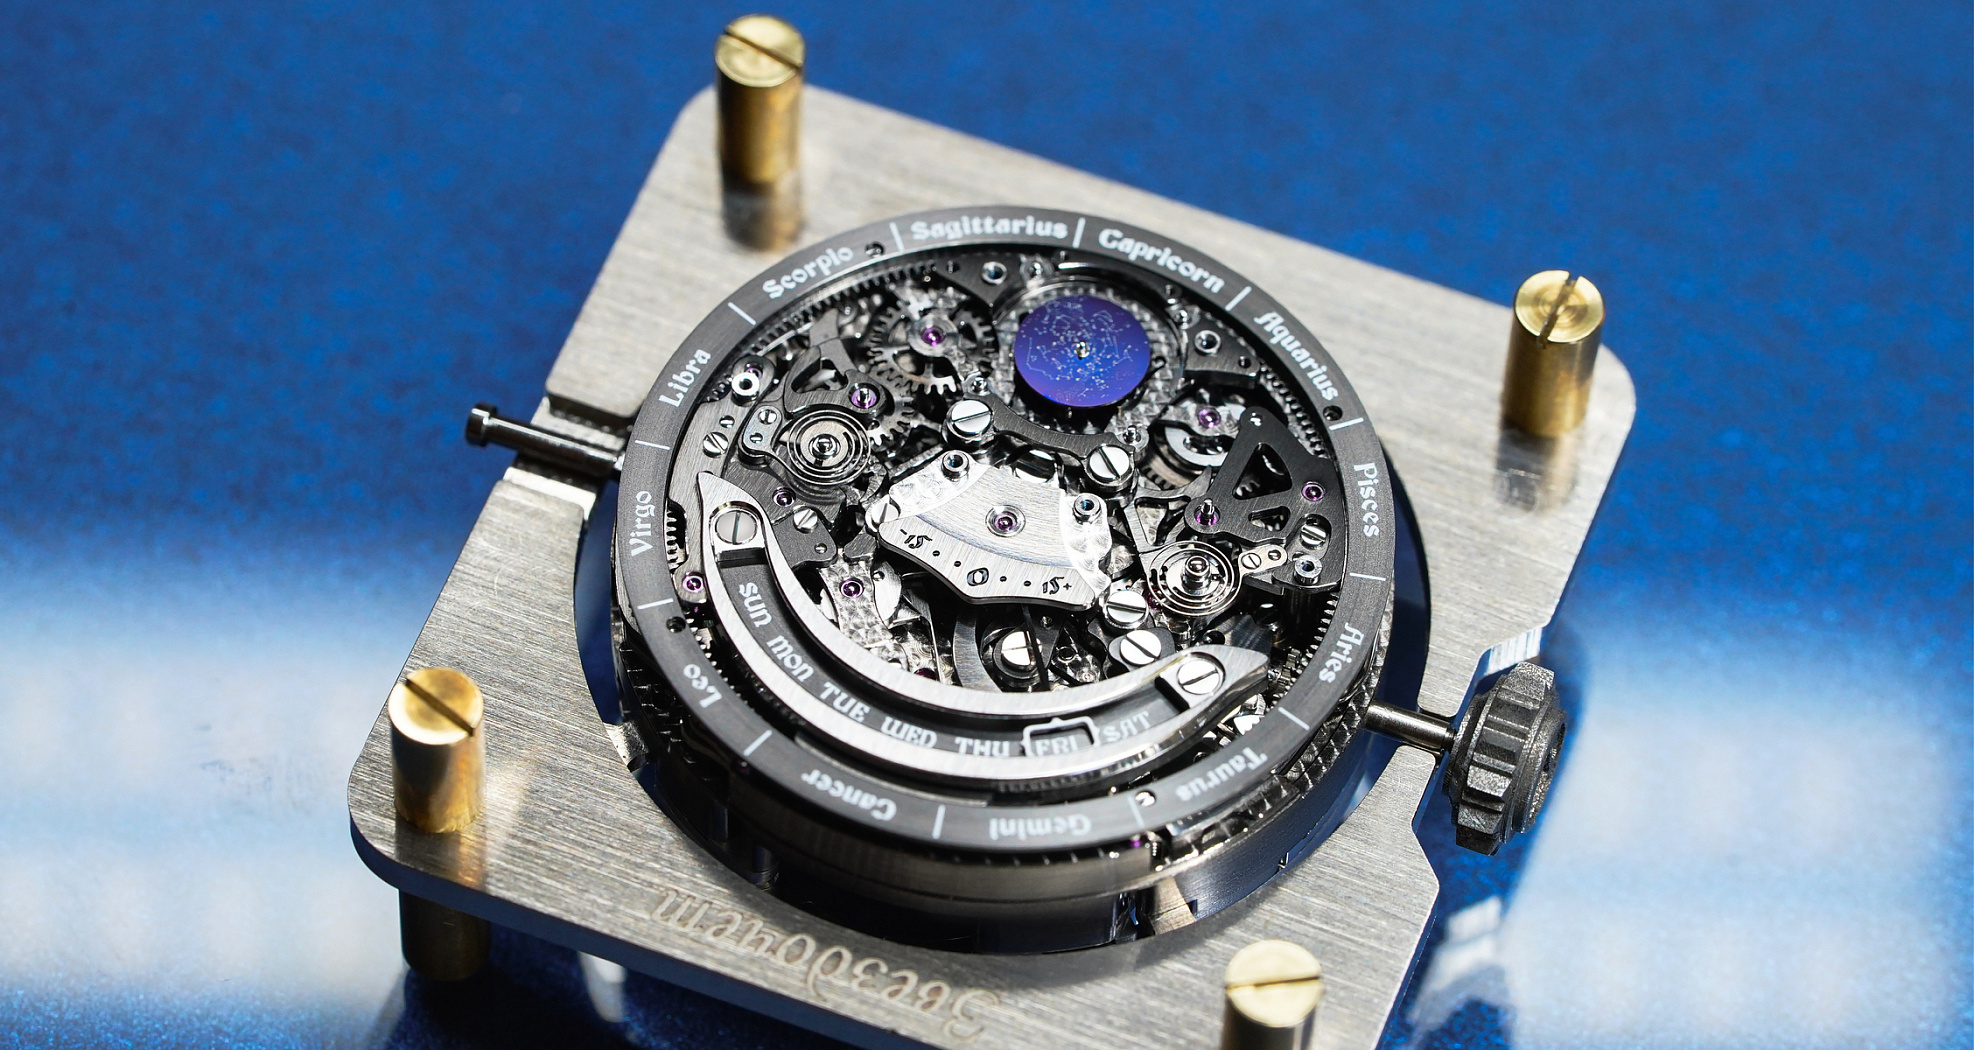 The Stargazer watch receives the Revo Awards prize in the Best Astronomical Complication category.